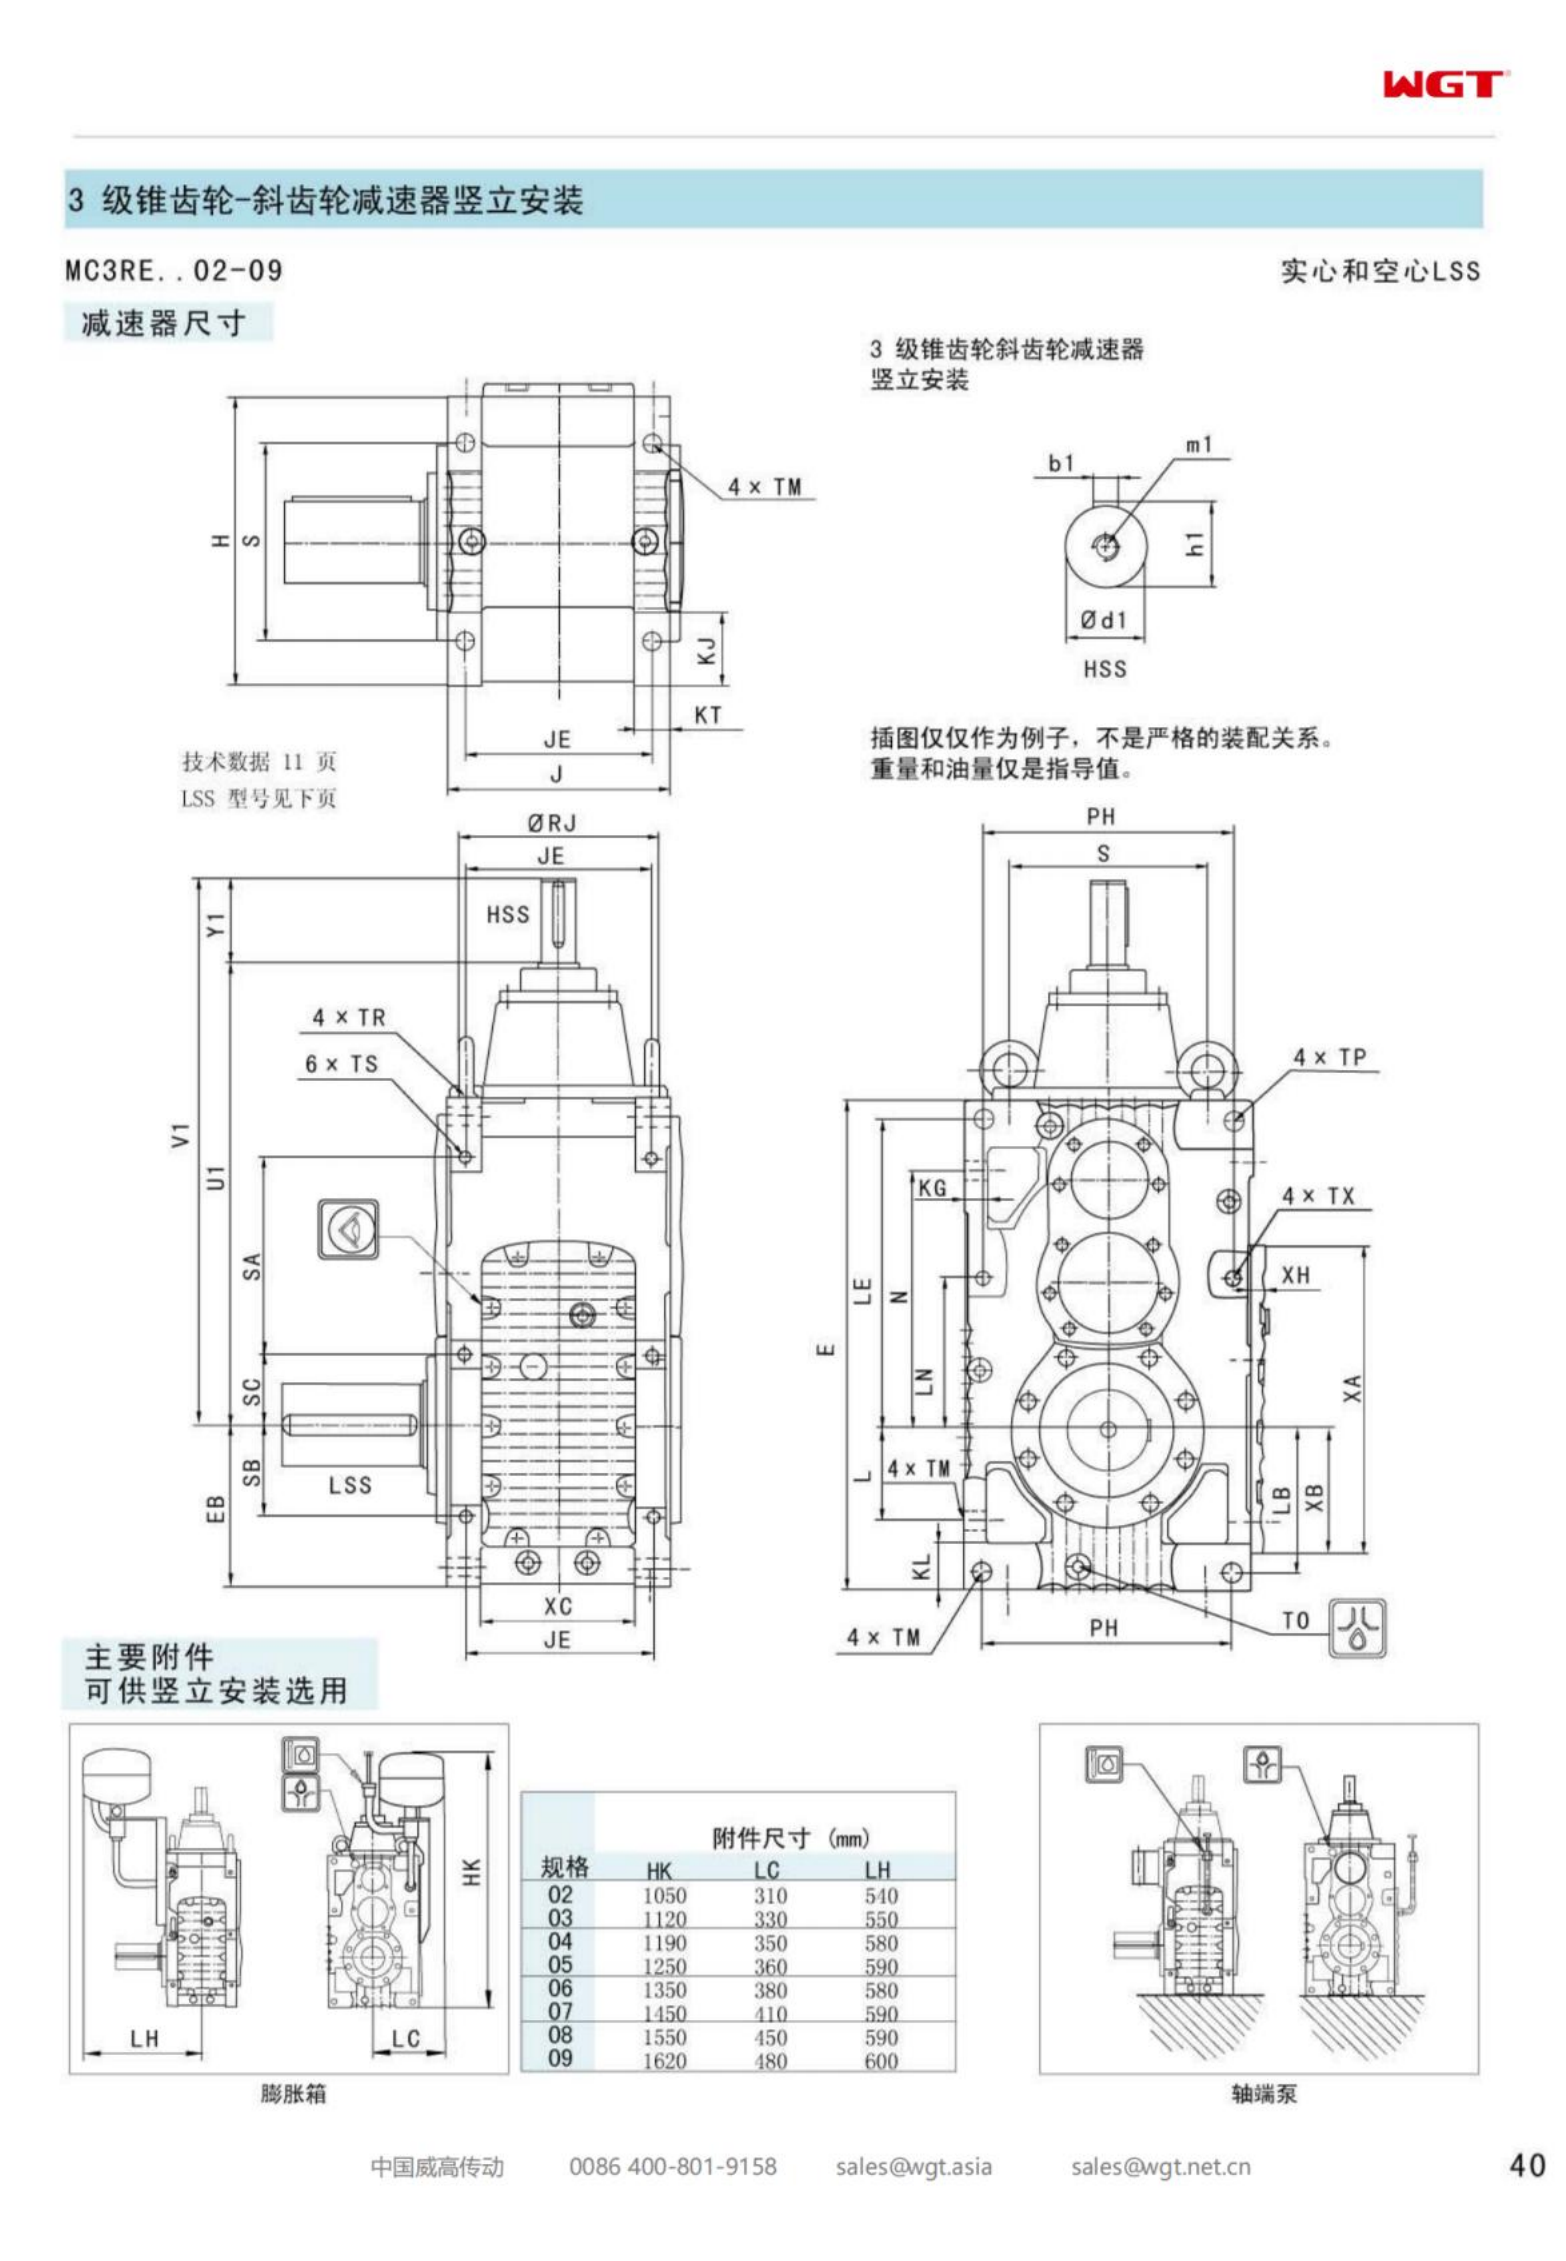 MC3RESF03 replaces _SEW_MC_Series gearbox (patent)